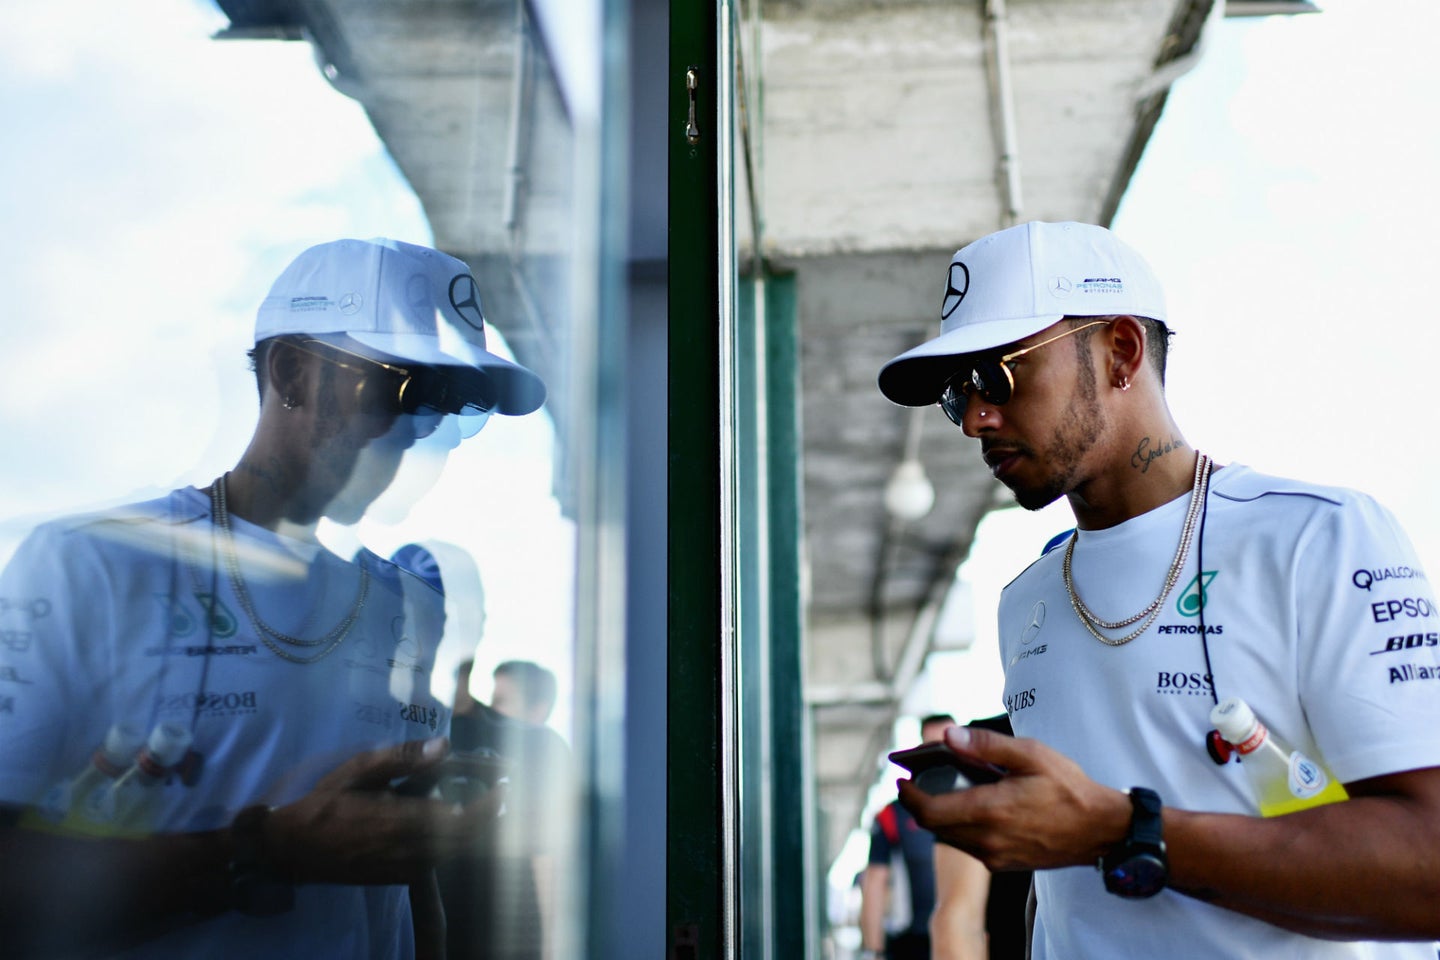 Lewis Hamilton Expects Ferrari To Have An “Easy Breeze” Towards Win at Hungary